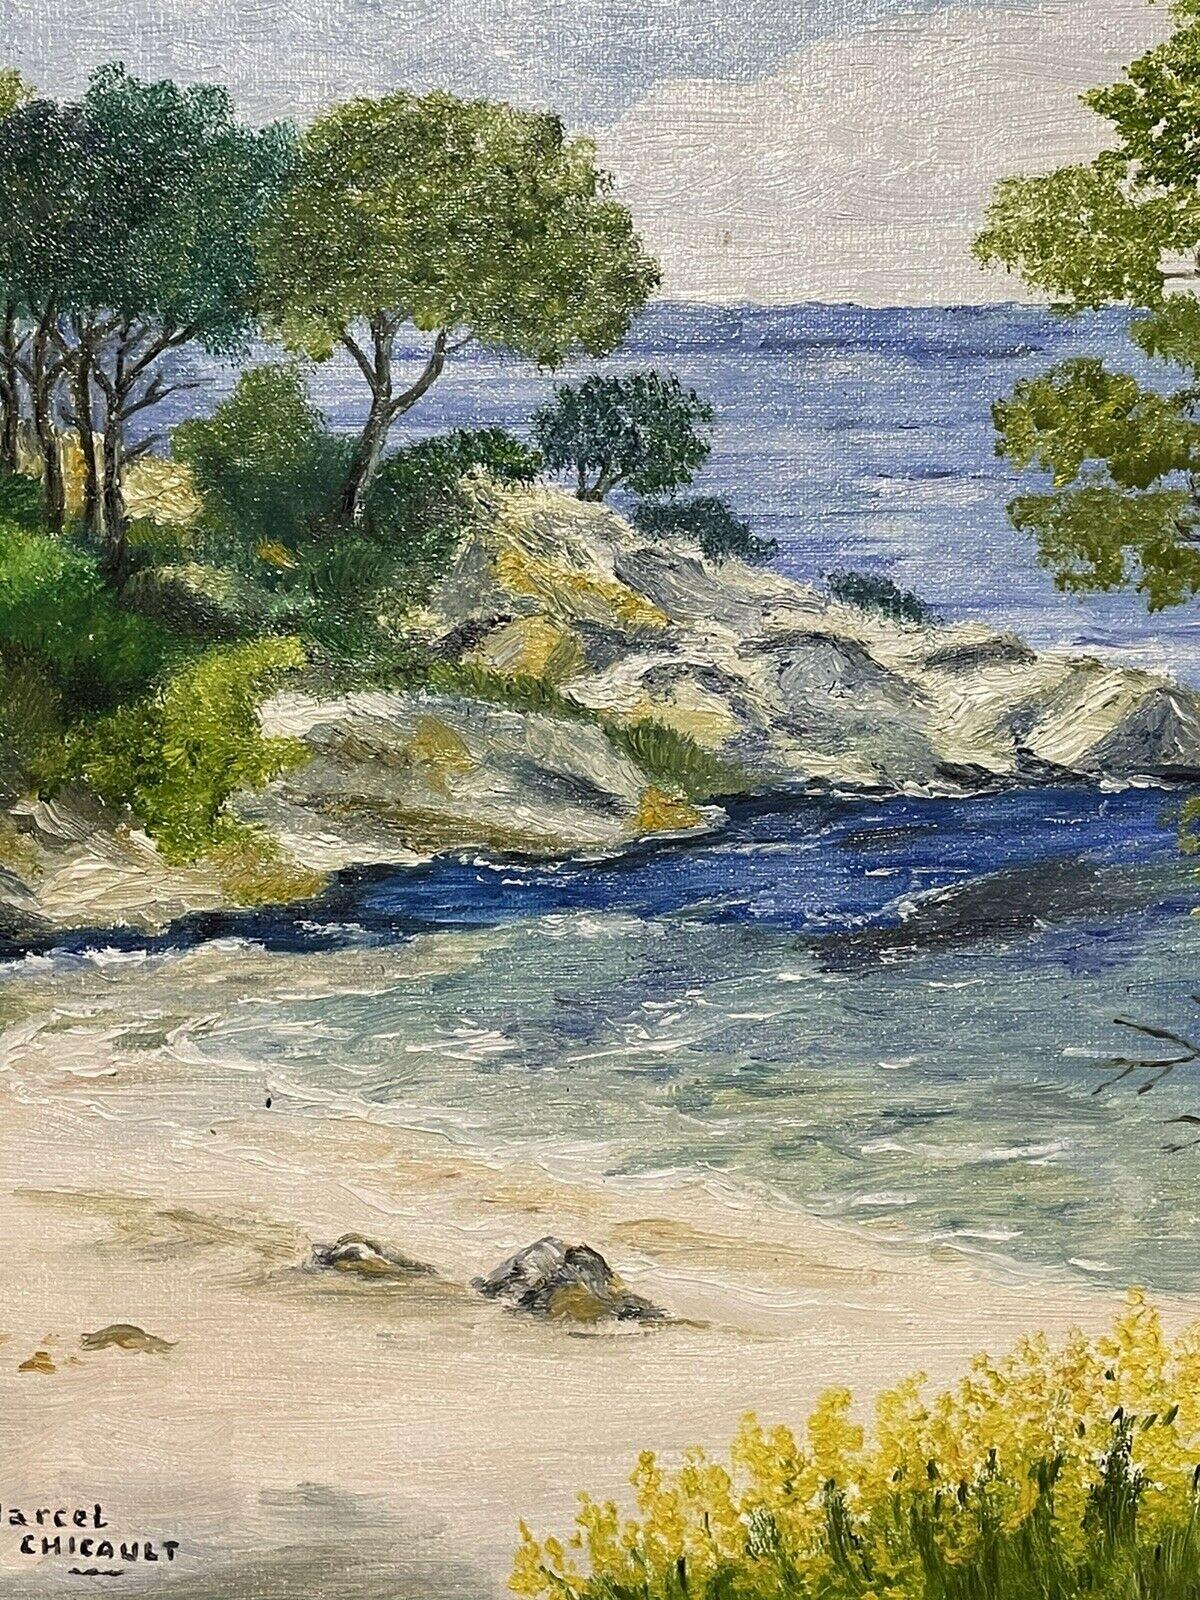 20th CENTURY FRENCH IMPRESSIONIST SIGNED OIL - CÔTE D’AZUR ROCKY COASTLINE - Impressionist Painting by French Impressionist